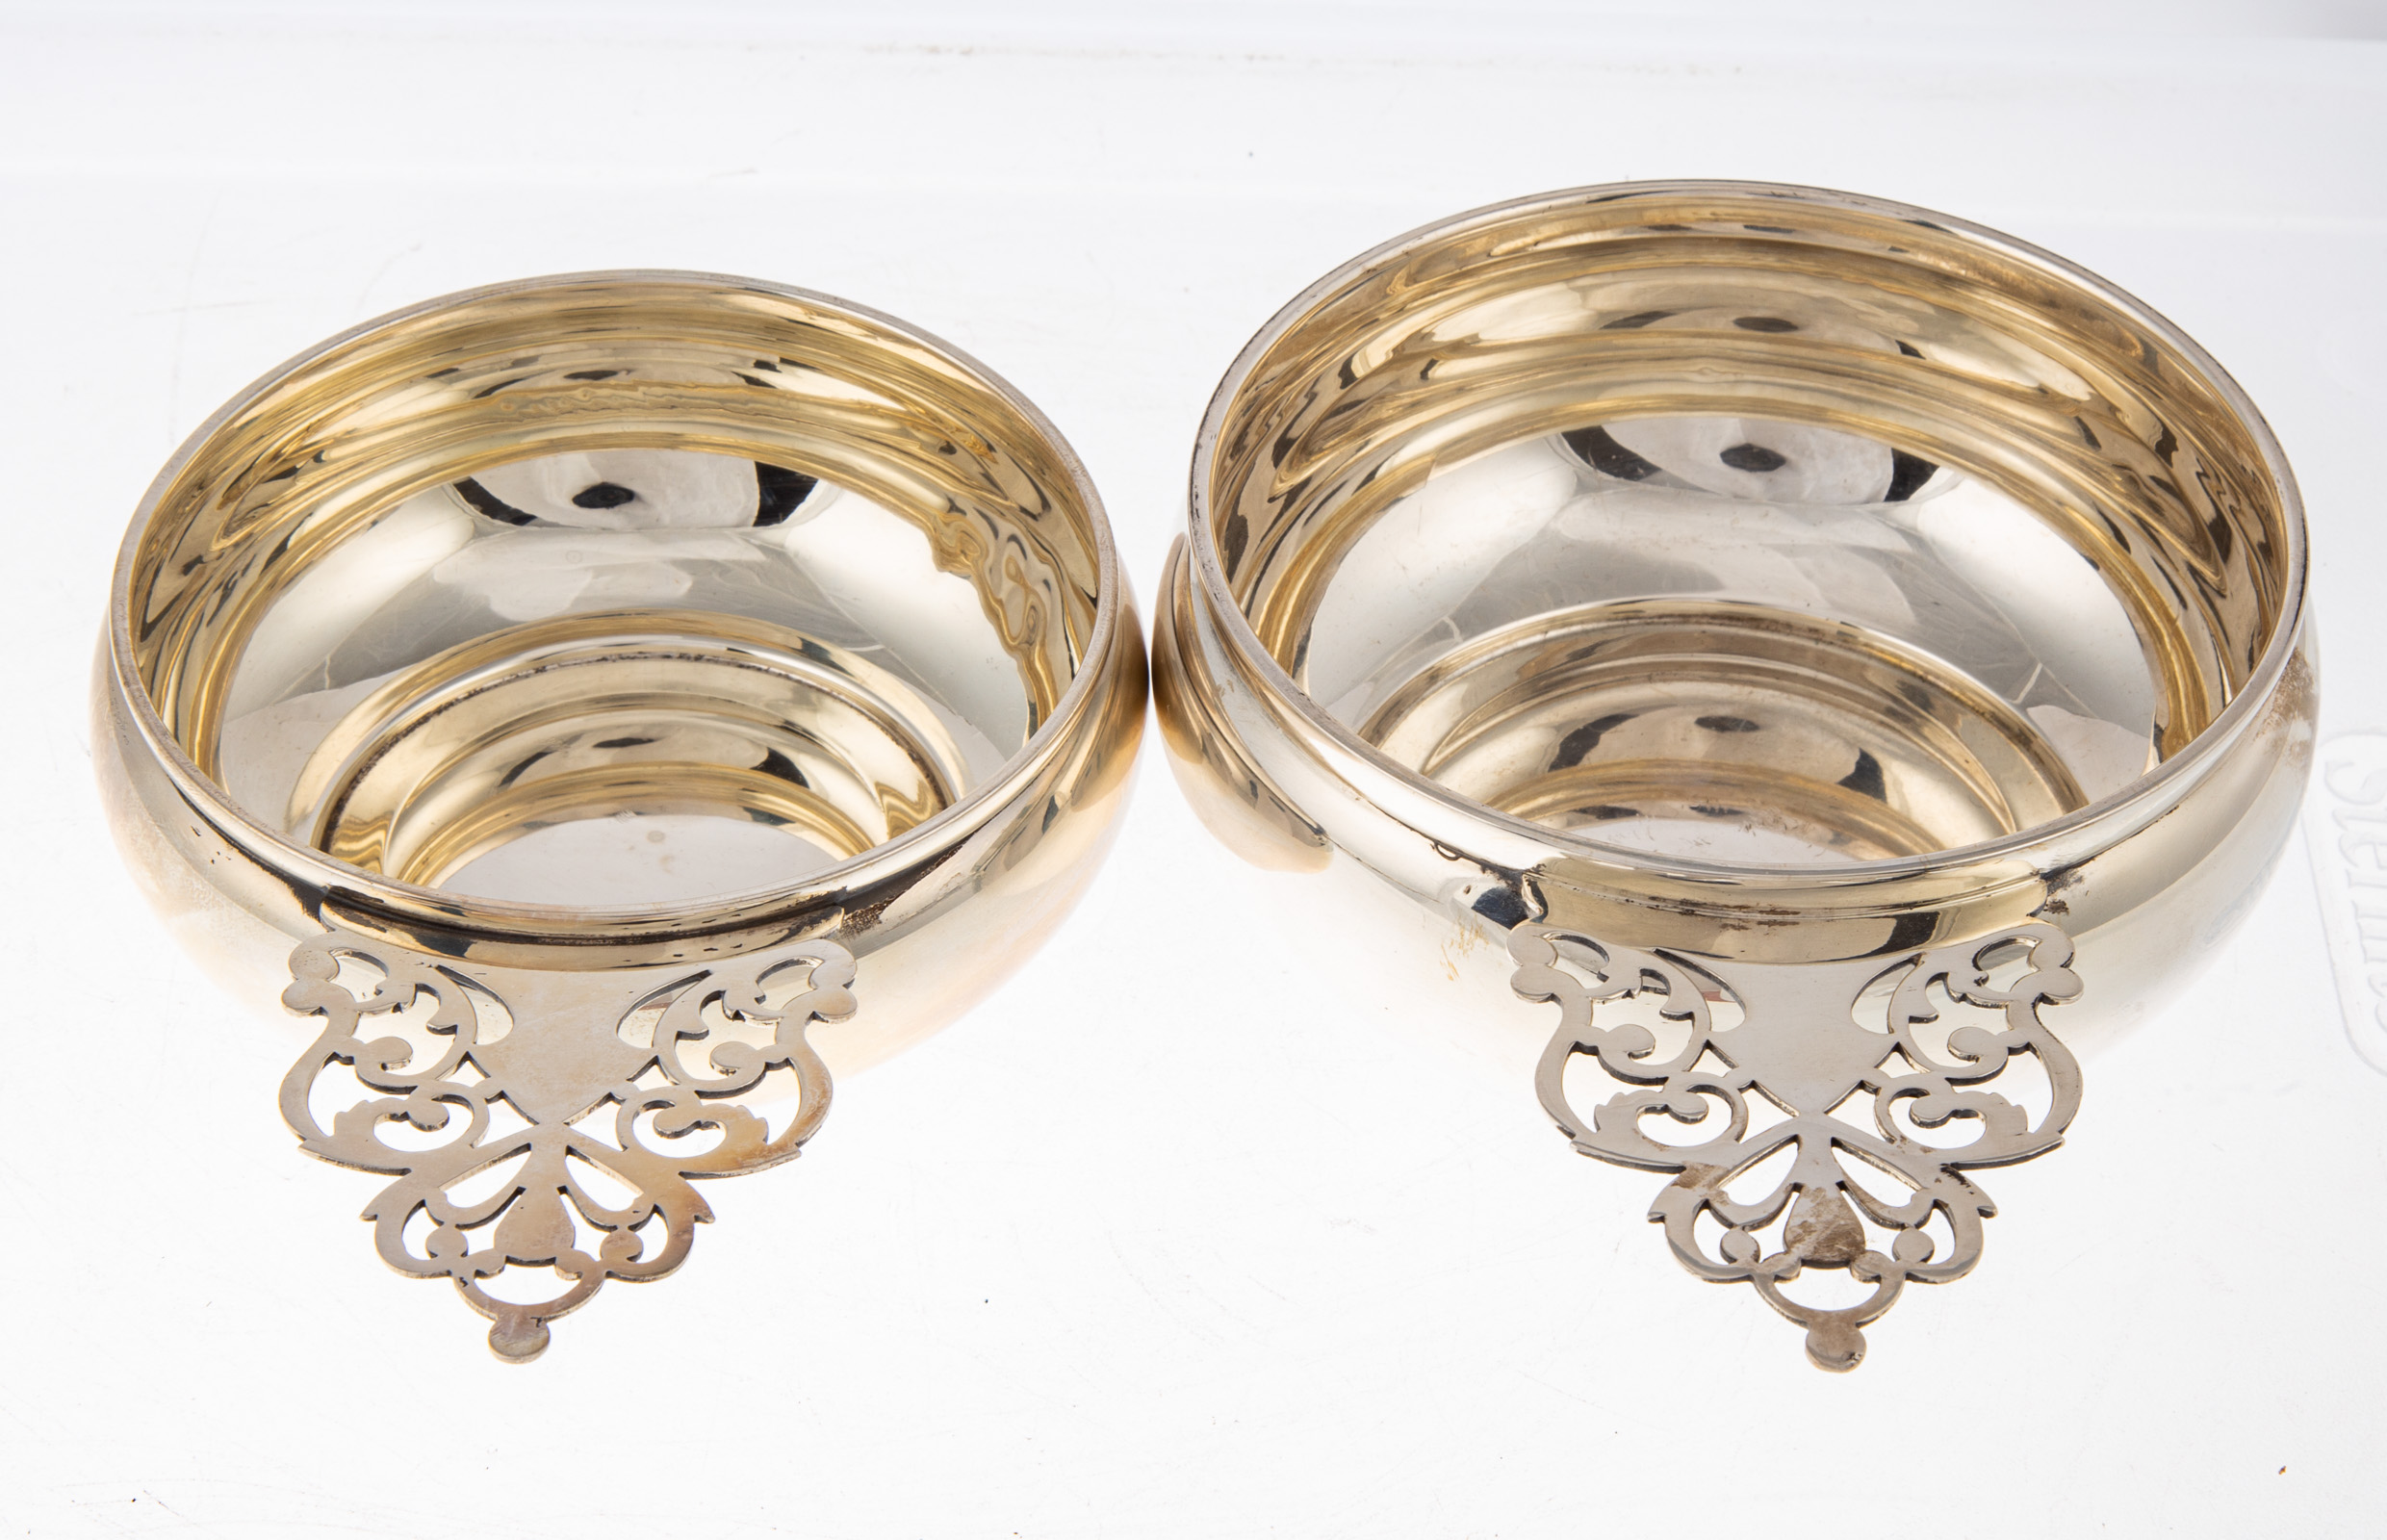 TWO STERLING PORRINGERS BY ELLMORE 289b9a